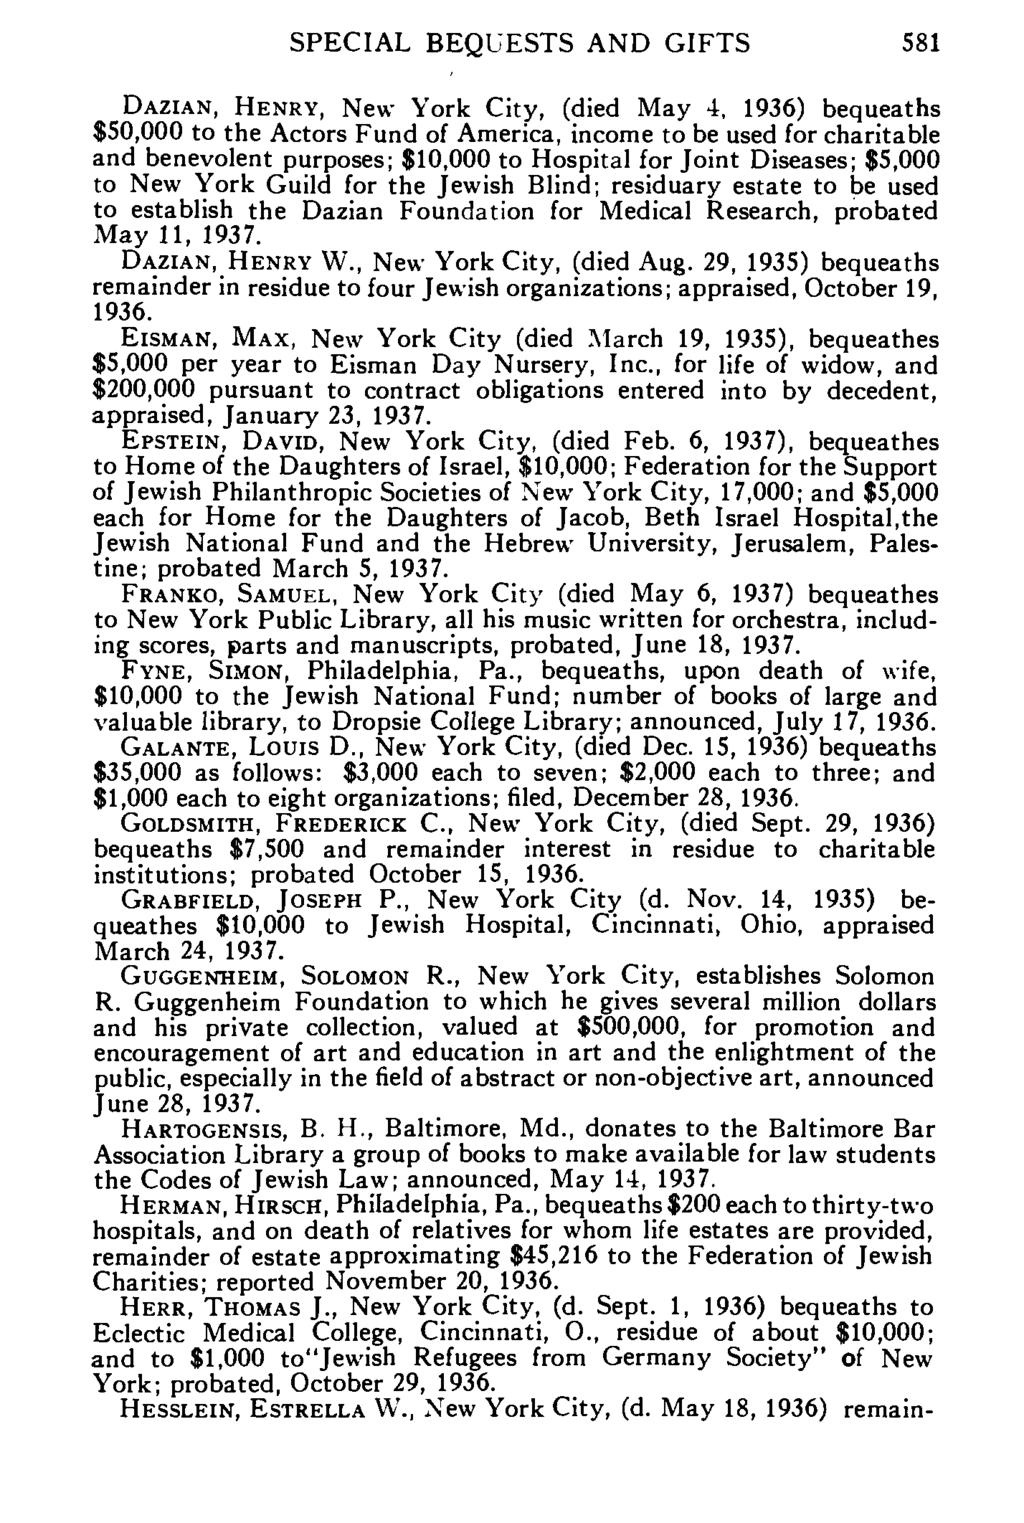 SPECIAL BEQUESTS AND GIFTS 581 DAZIAN, HENRY, New York City, (died May 4, 1936) bequeaths $50,000 to the Actors Fund of America, income to be used for charitable and benevolent purposes; $10,000 to